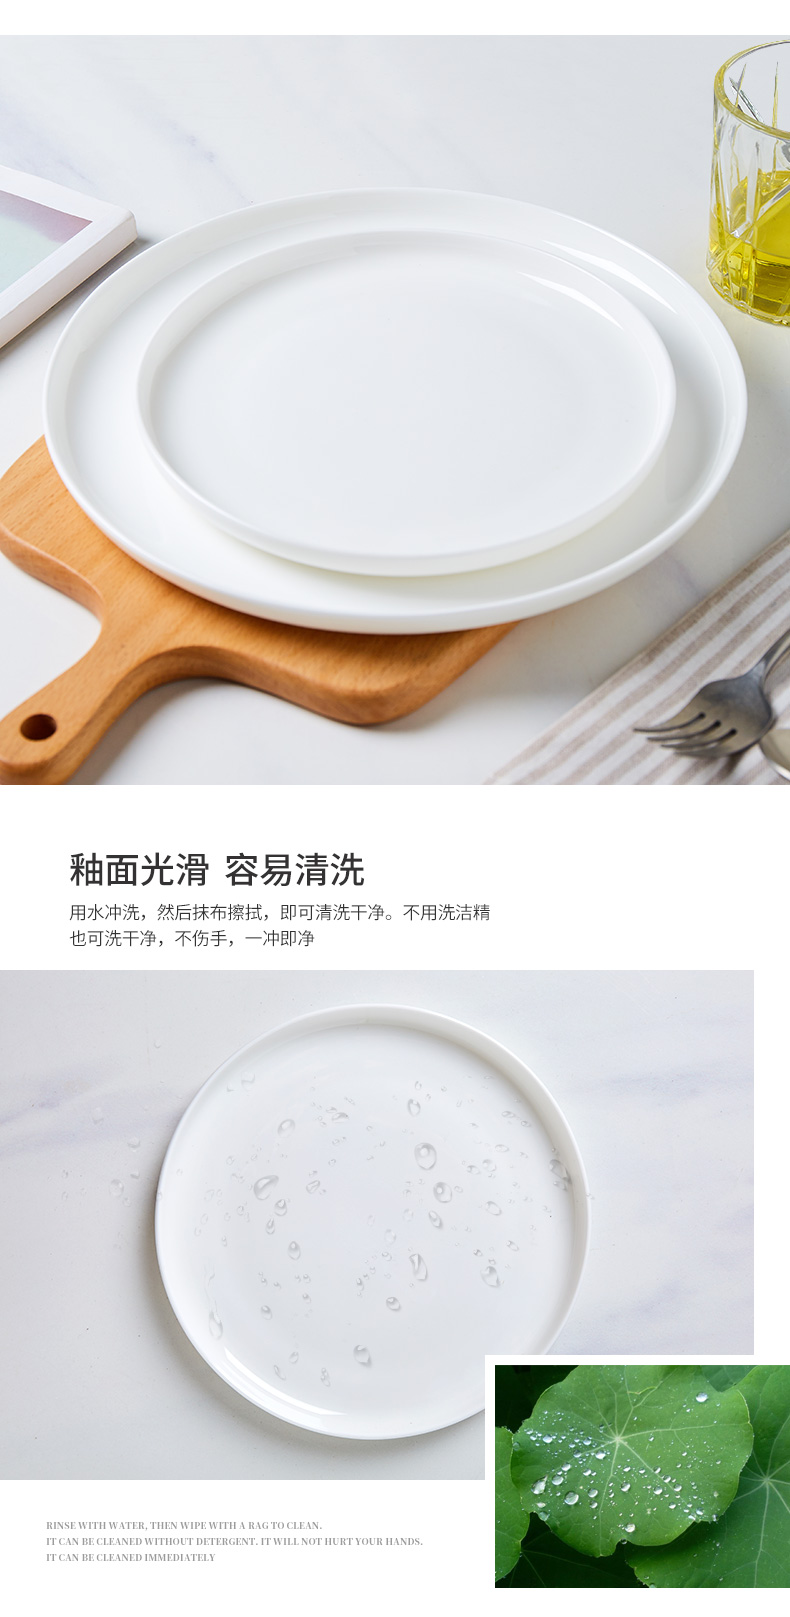 Japanese white ipads China plate son home round flat chassis west pot dish dessert plate ceramic disc steak plate